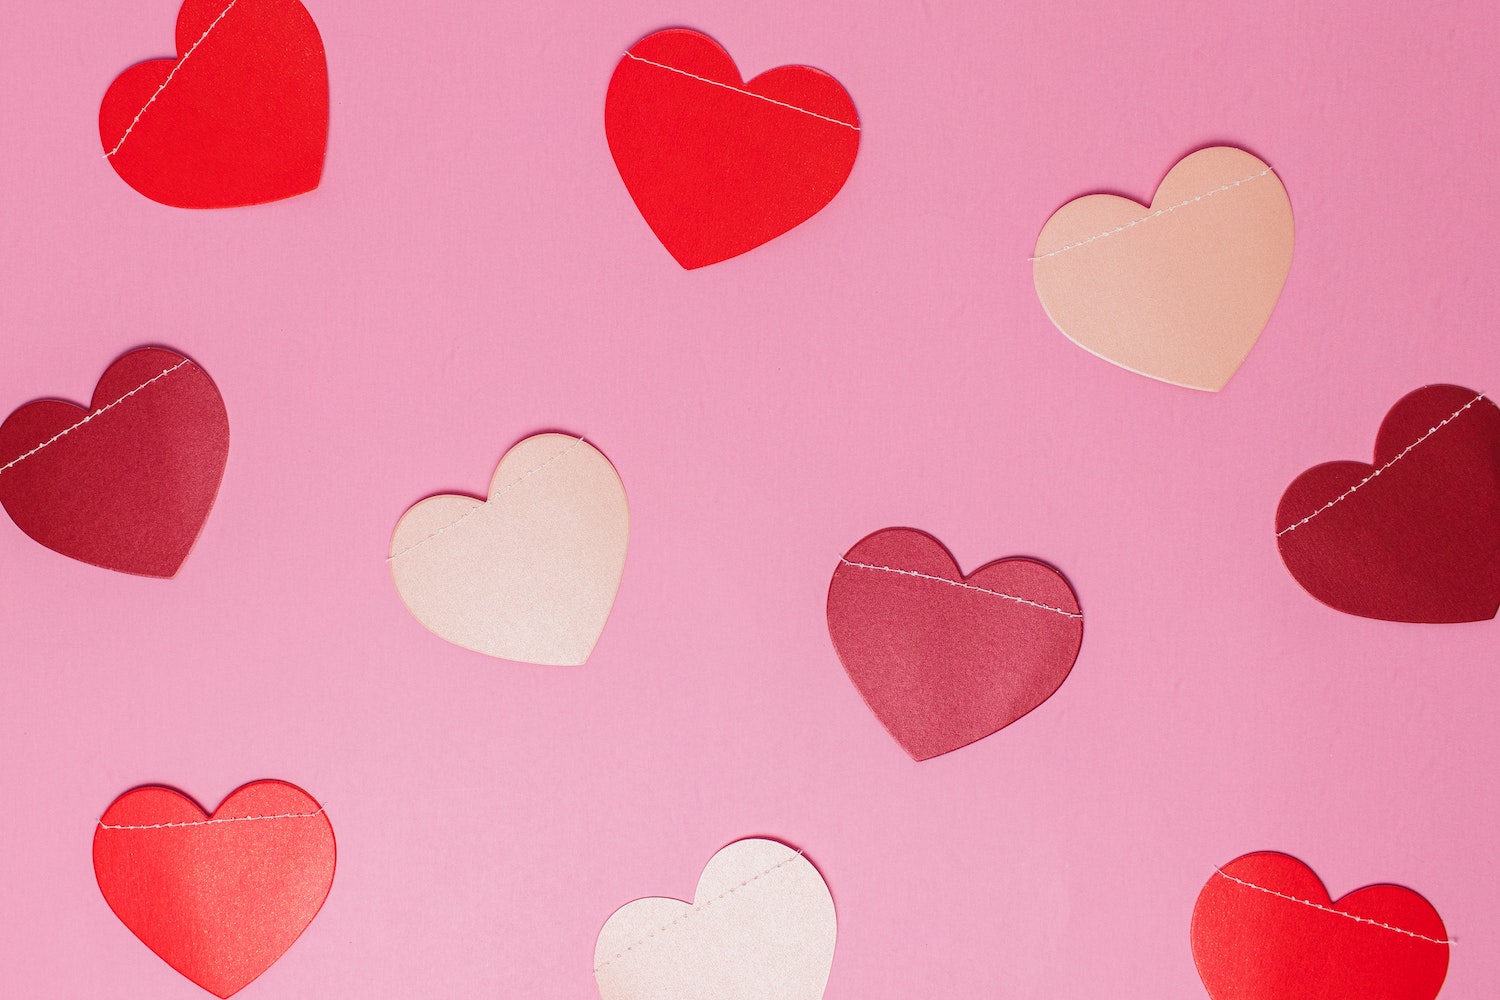 Pink and red hearts spread across a pink background